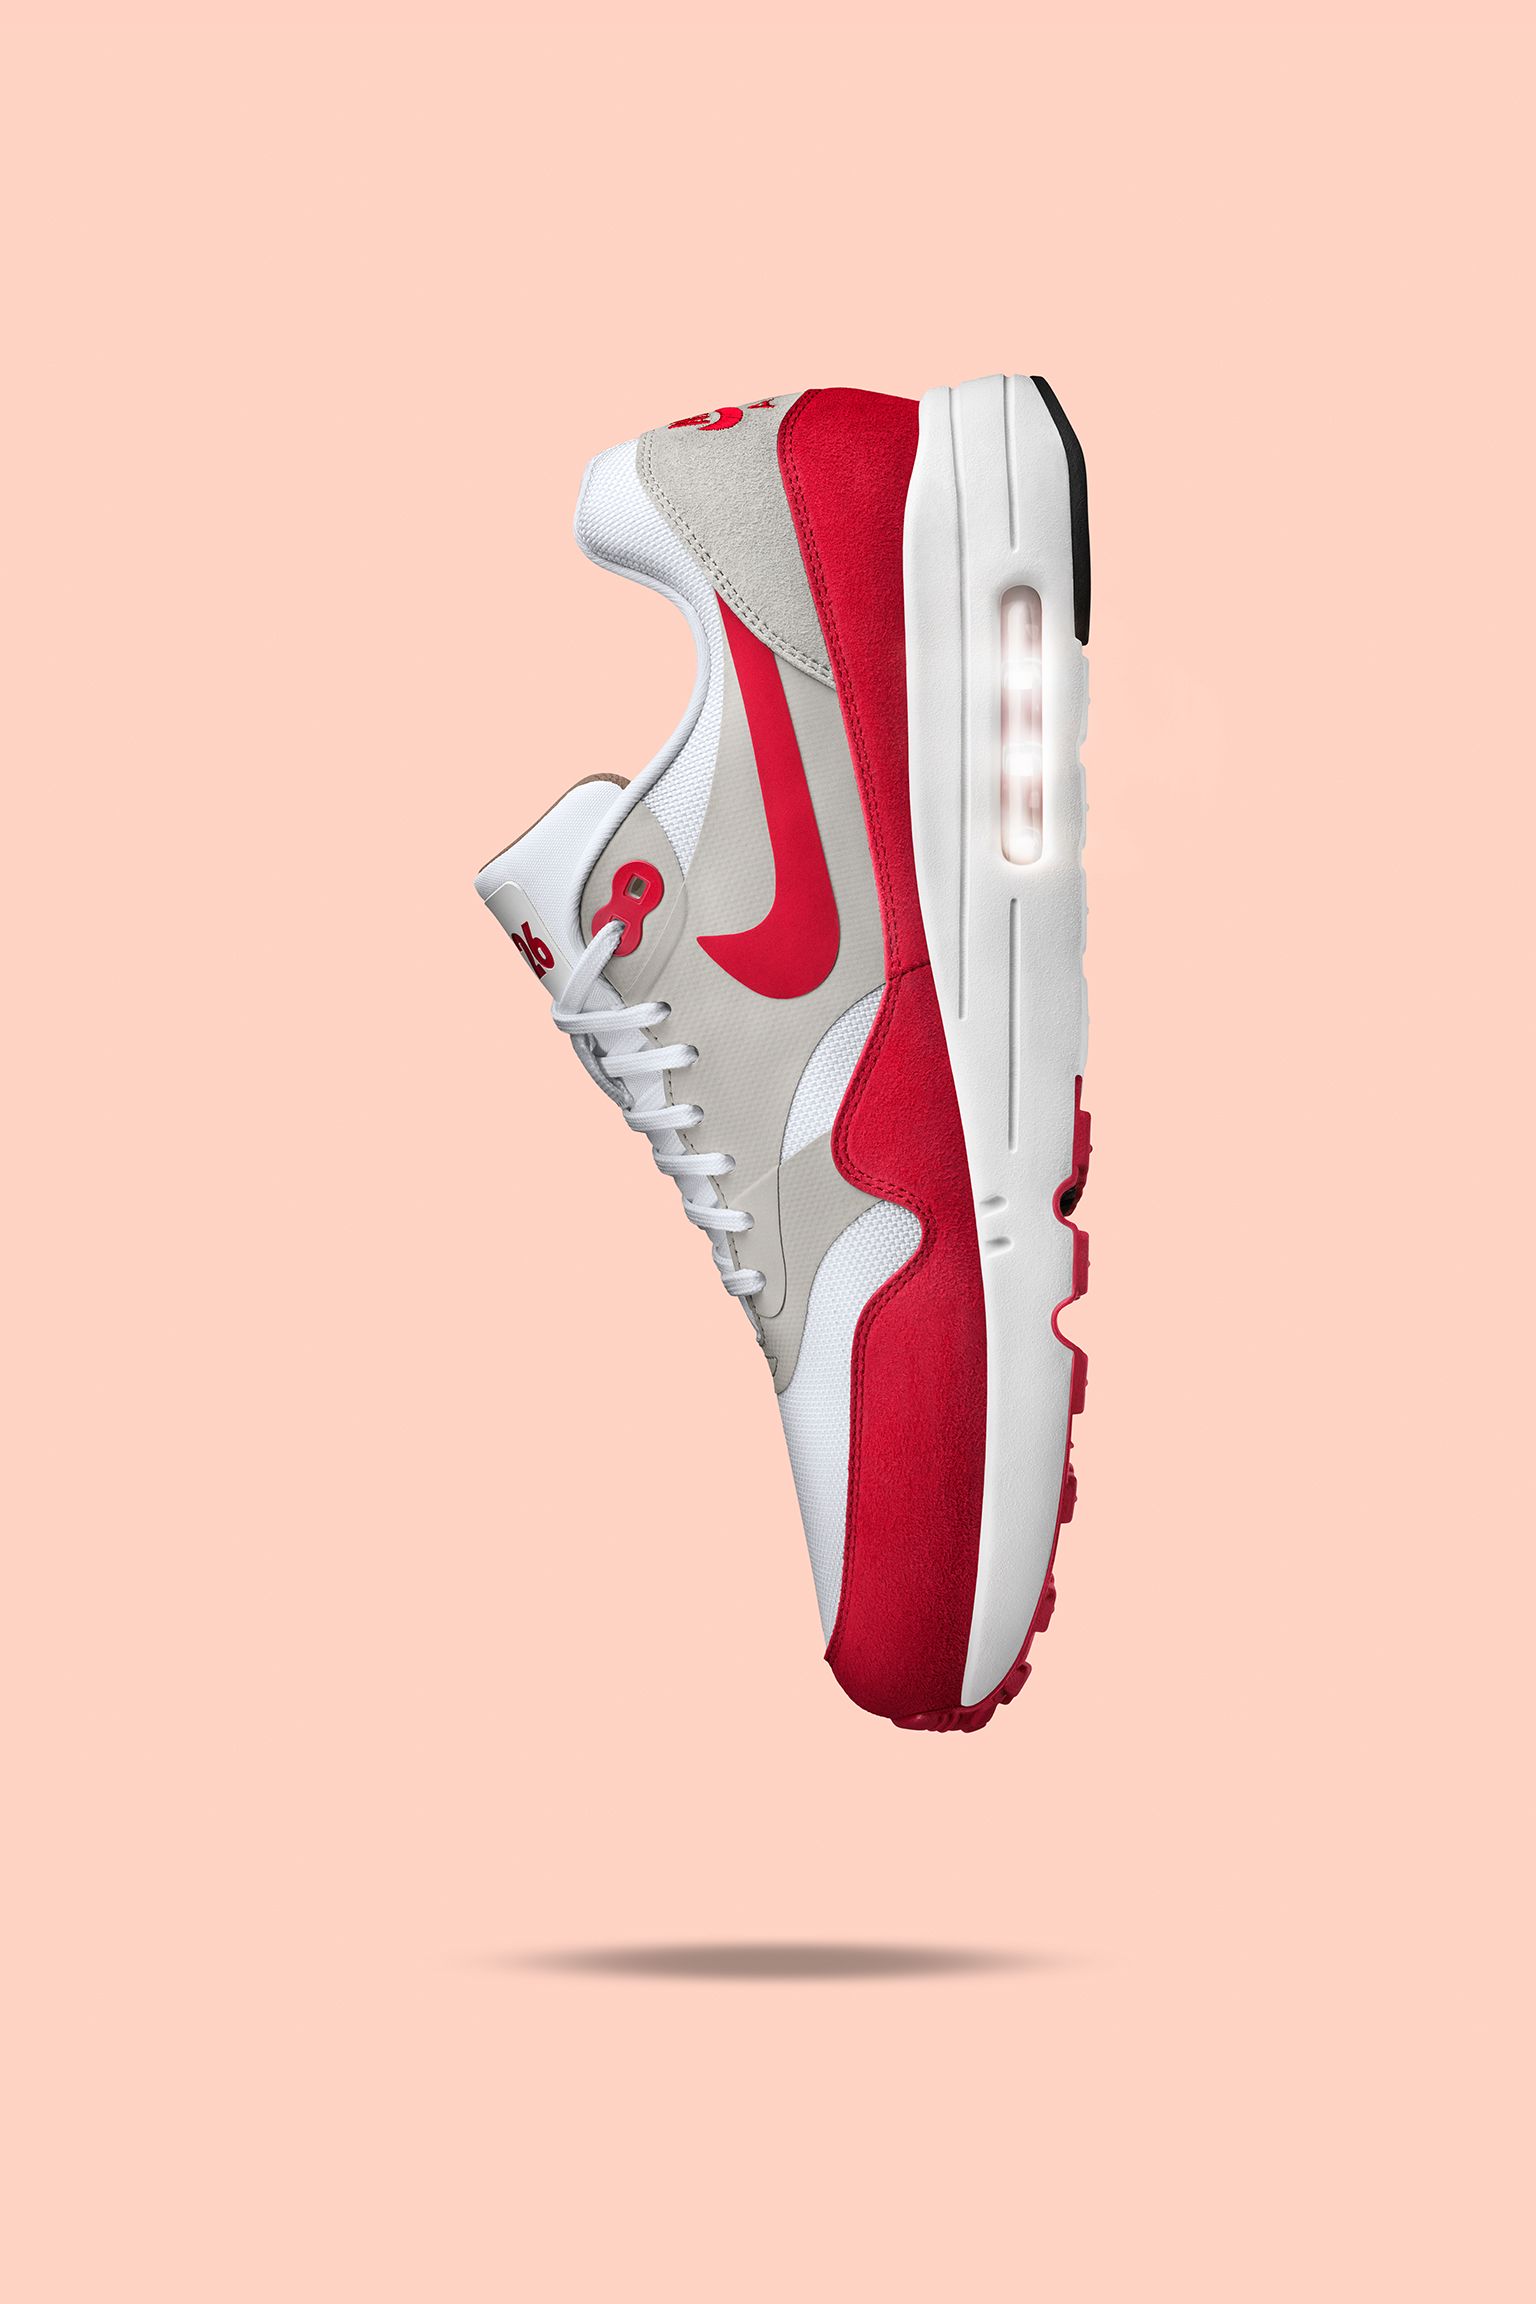 Nike Air Max Ultra 2.0 LE 'White University Red'. Nike SNKRS